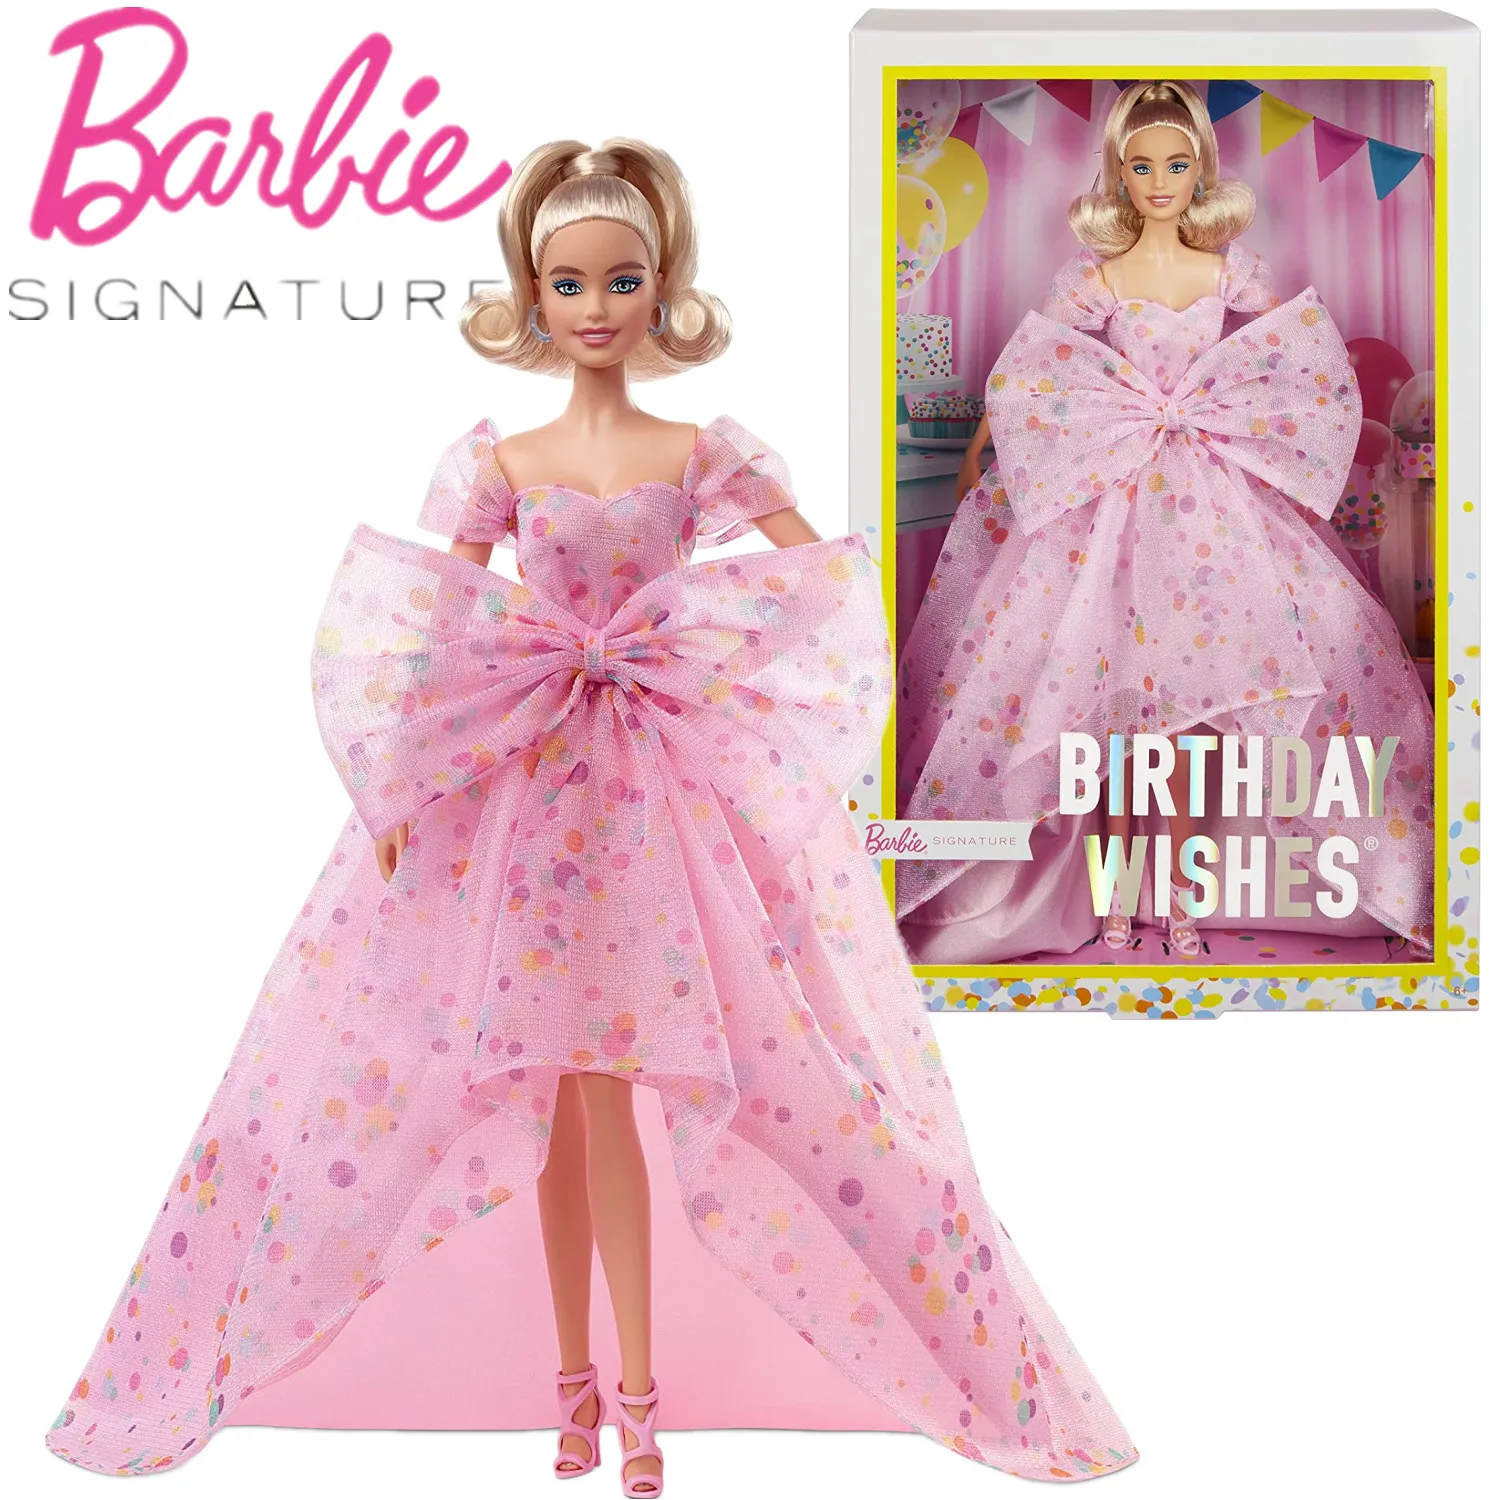 

Barbie Signature 2022 New Birthday Wishes Doll Collector's Edition Dolls Toys Fashion Model Girls Birthday Toy Gift HCB89